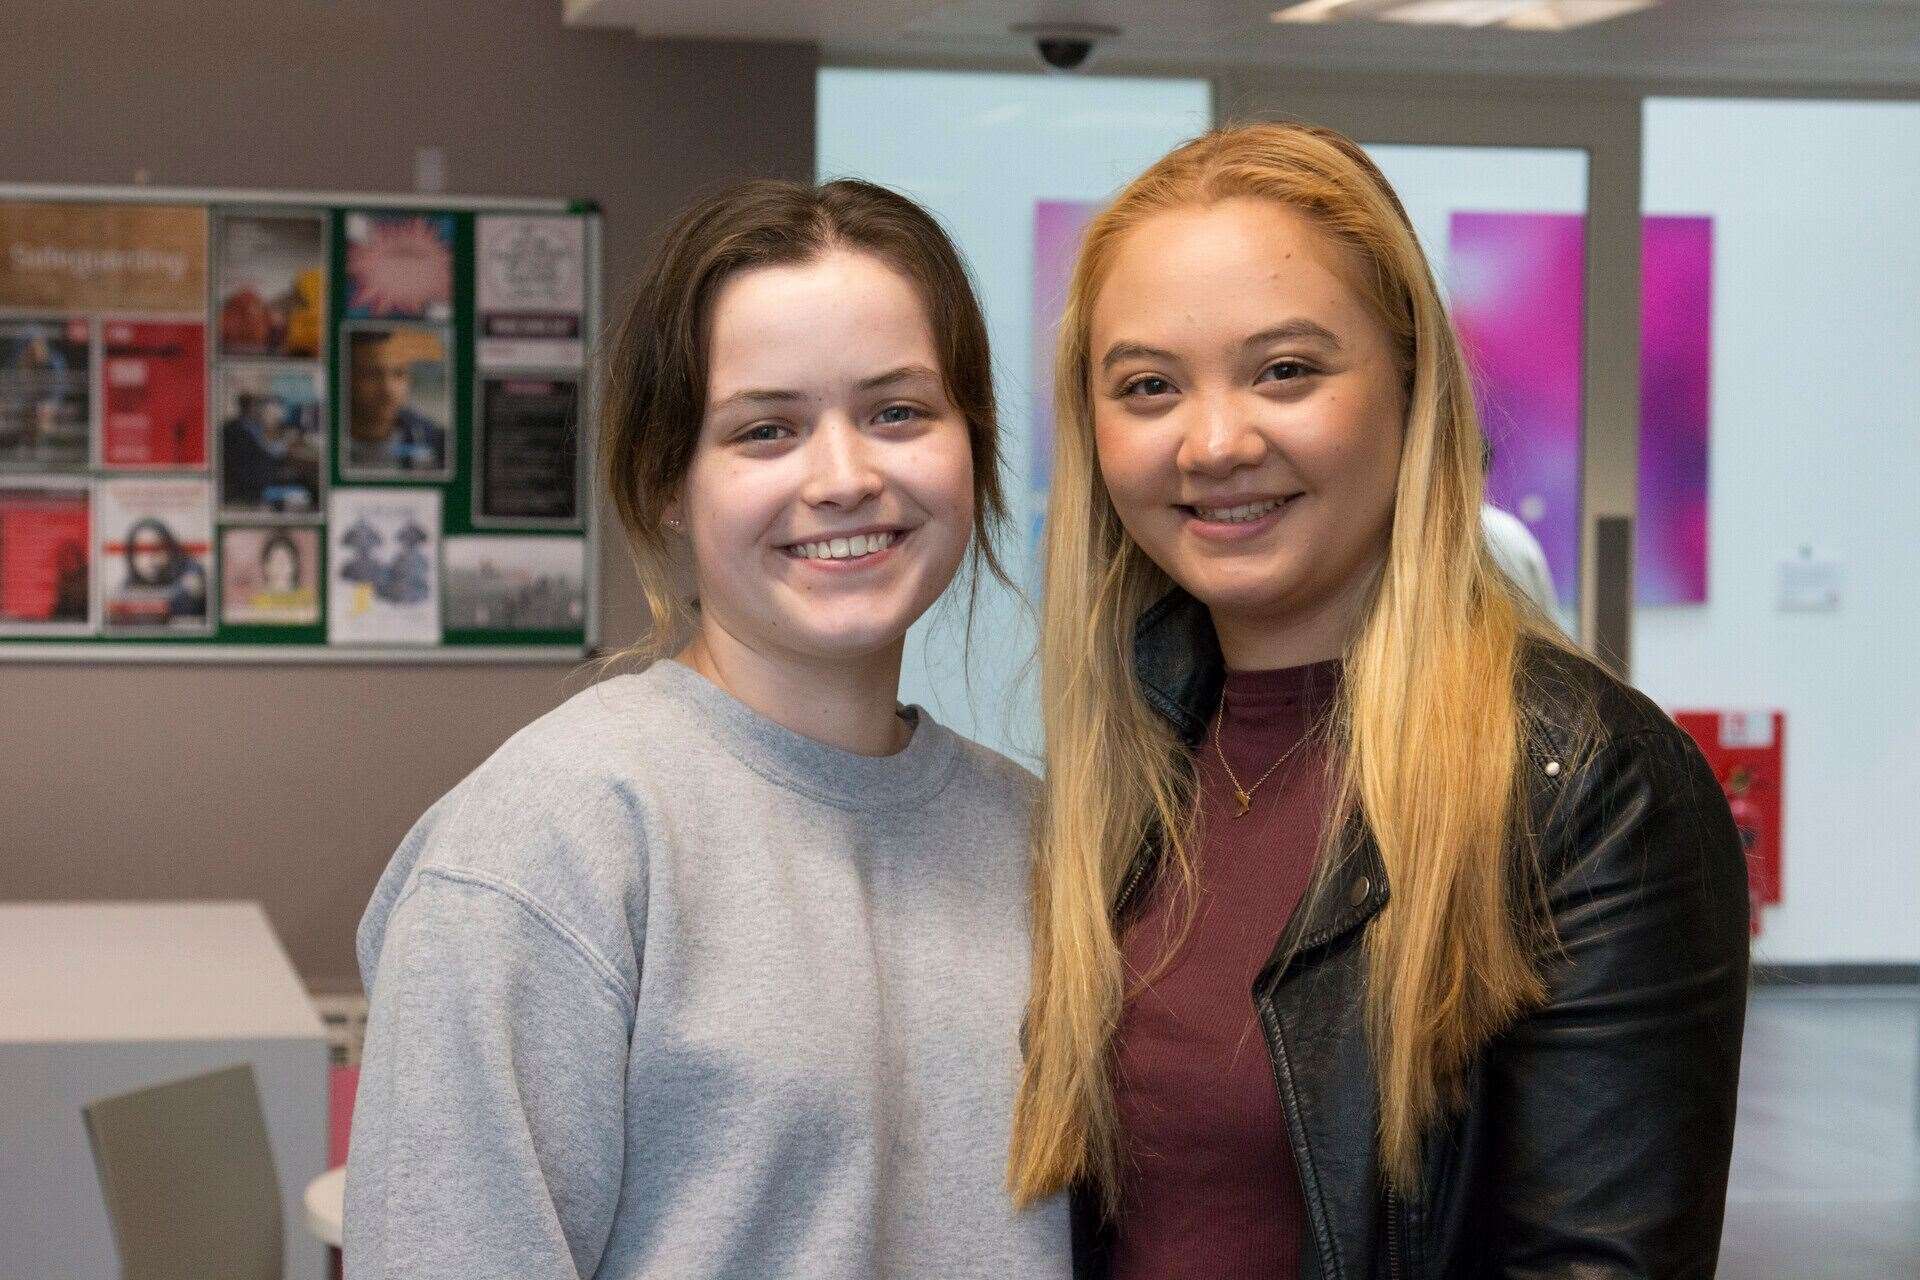 Emily Williams and Abi Taylor from West Kent College (15327657)